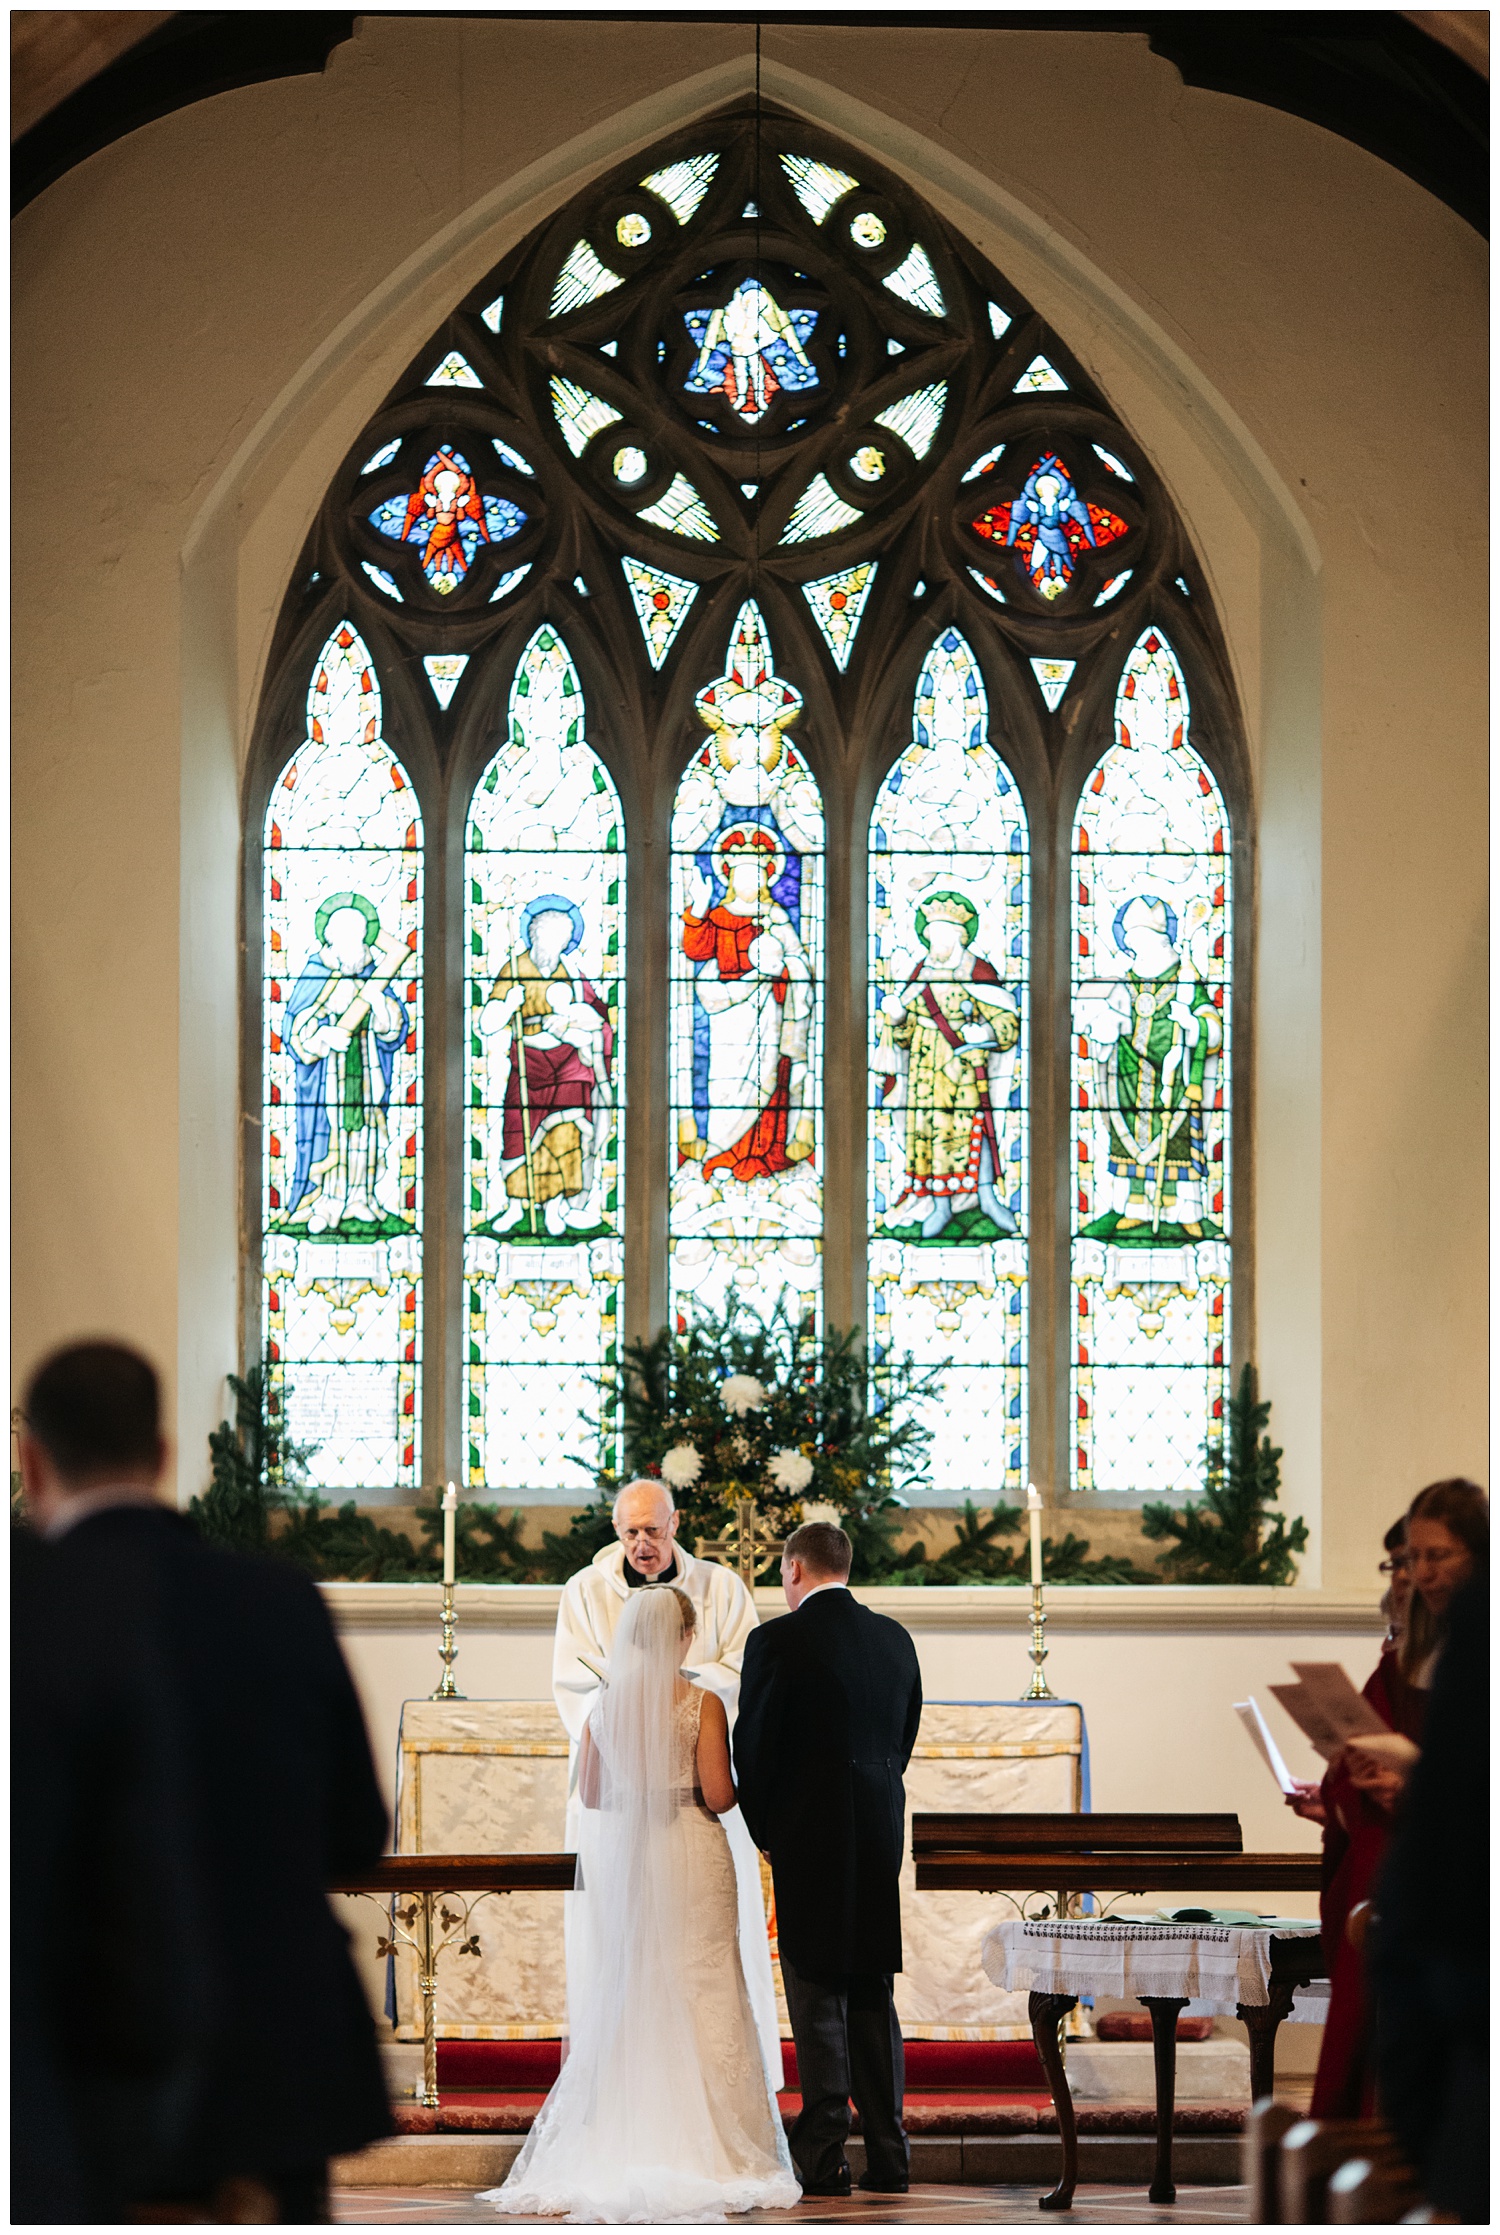 The bride and groom stand in front of the stained glass window and vicar at the St Thomas' Church in Bradwell-on-Sea